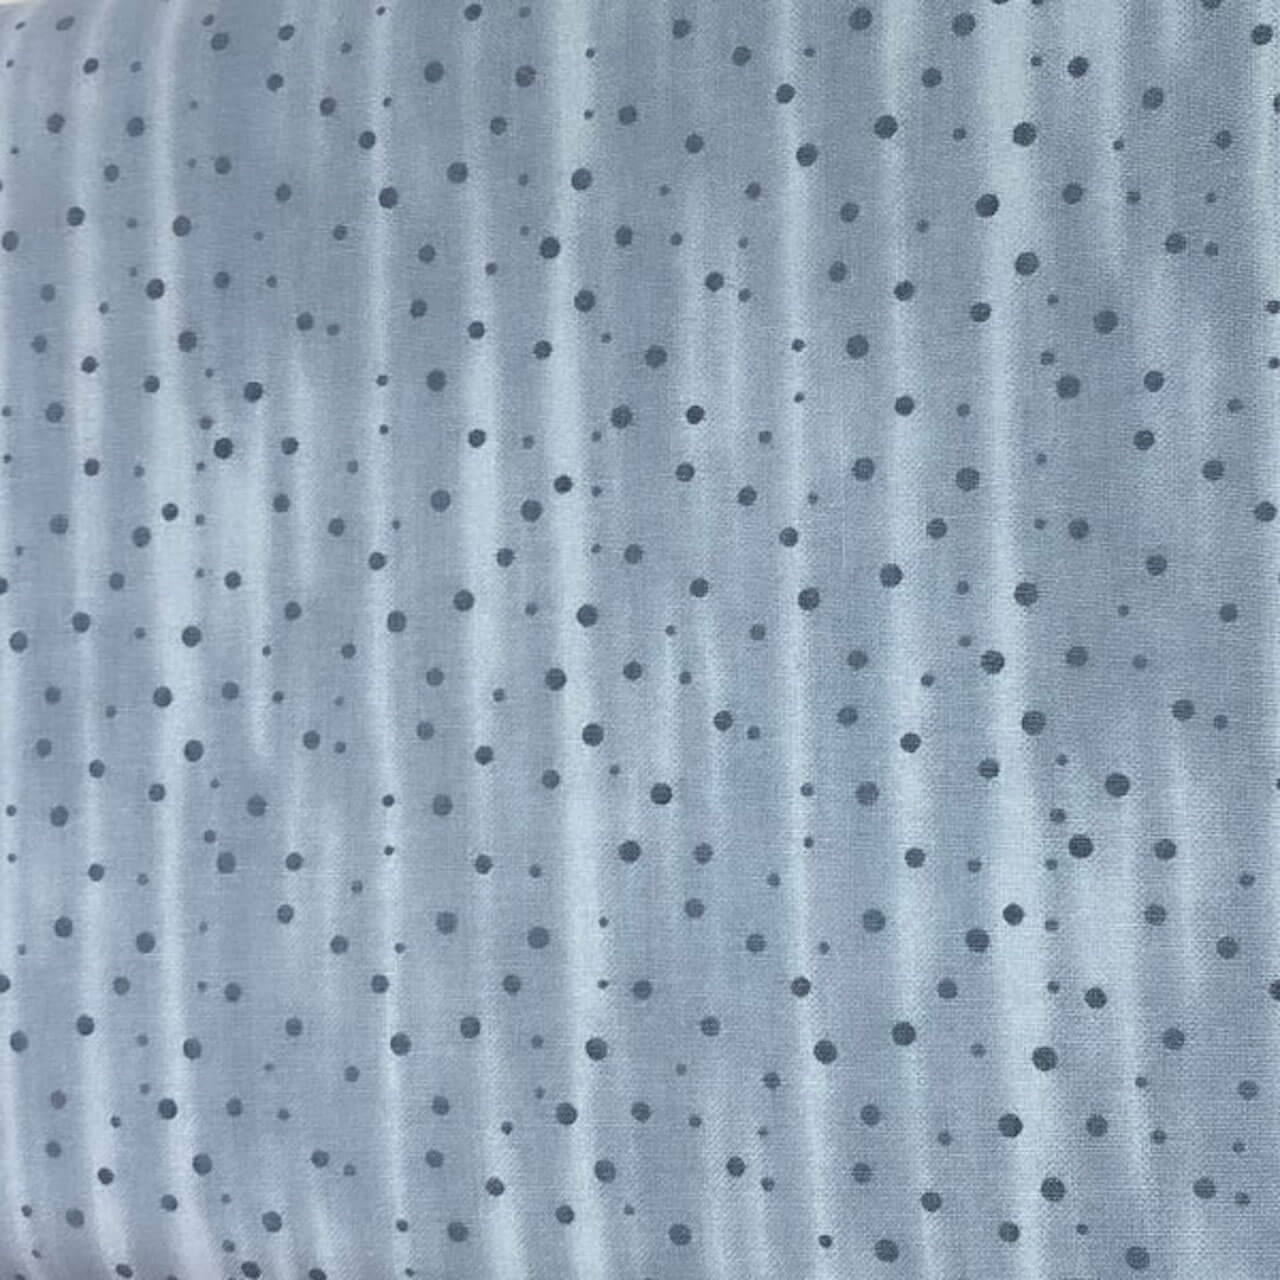 John Louden Fabric - Grey from the Waterfall Blender collection